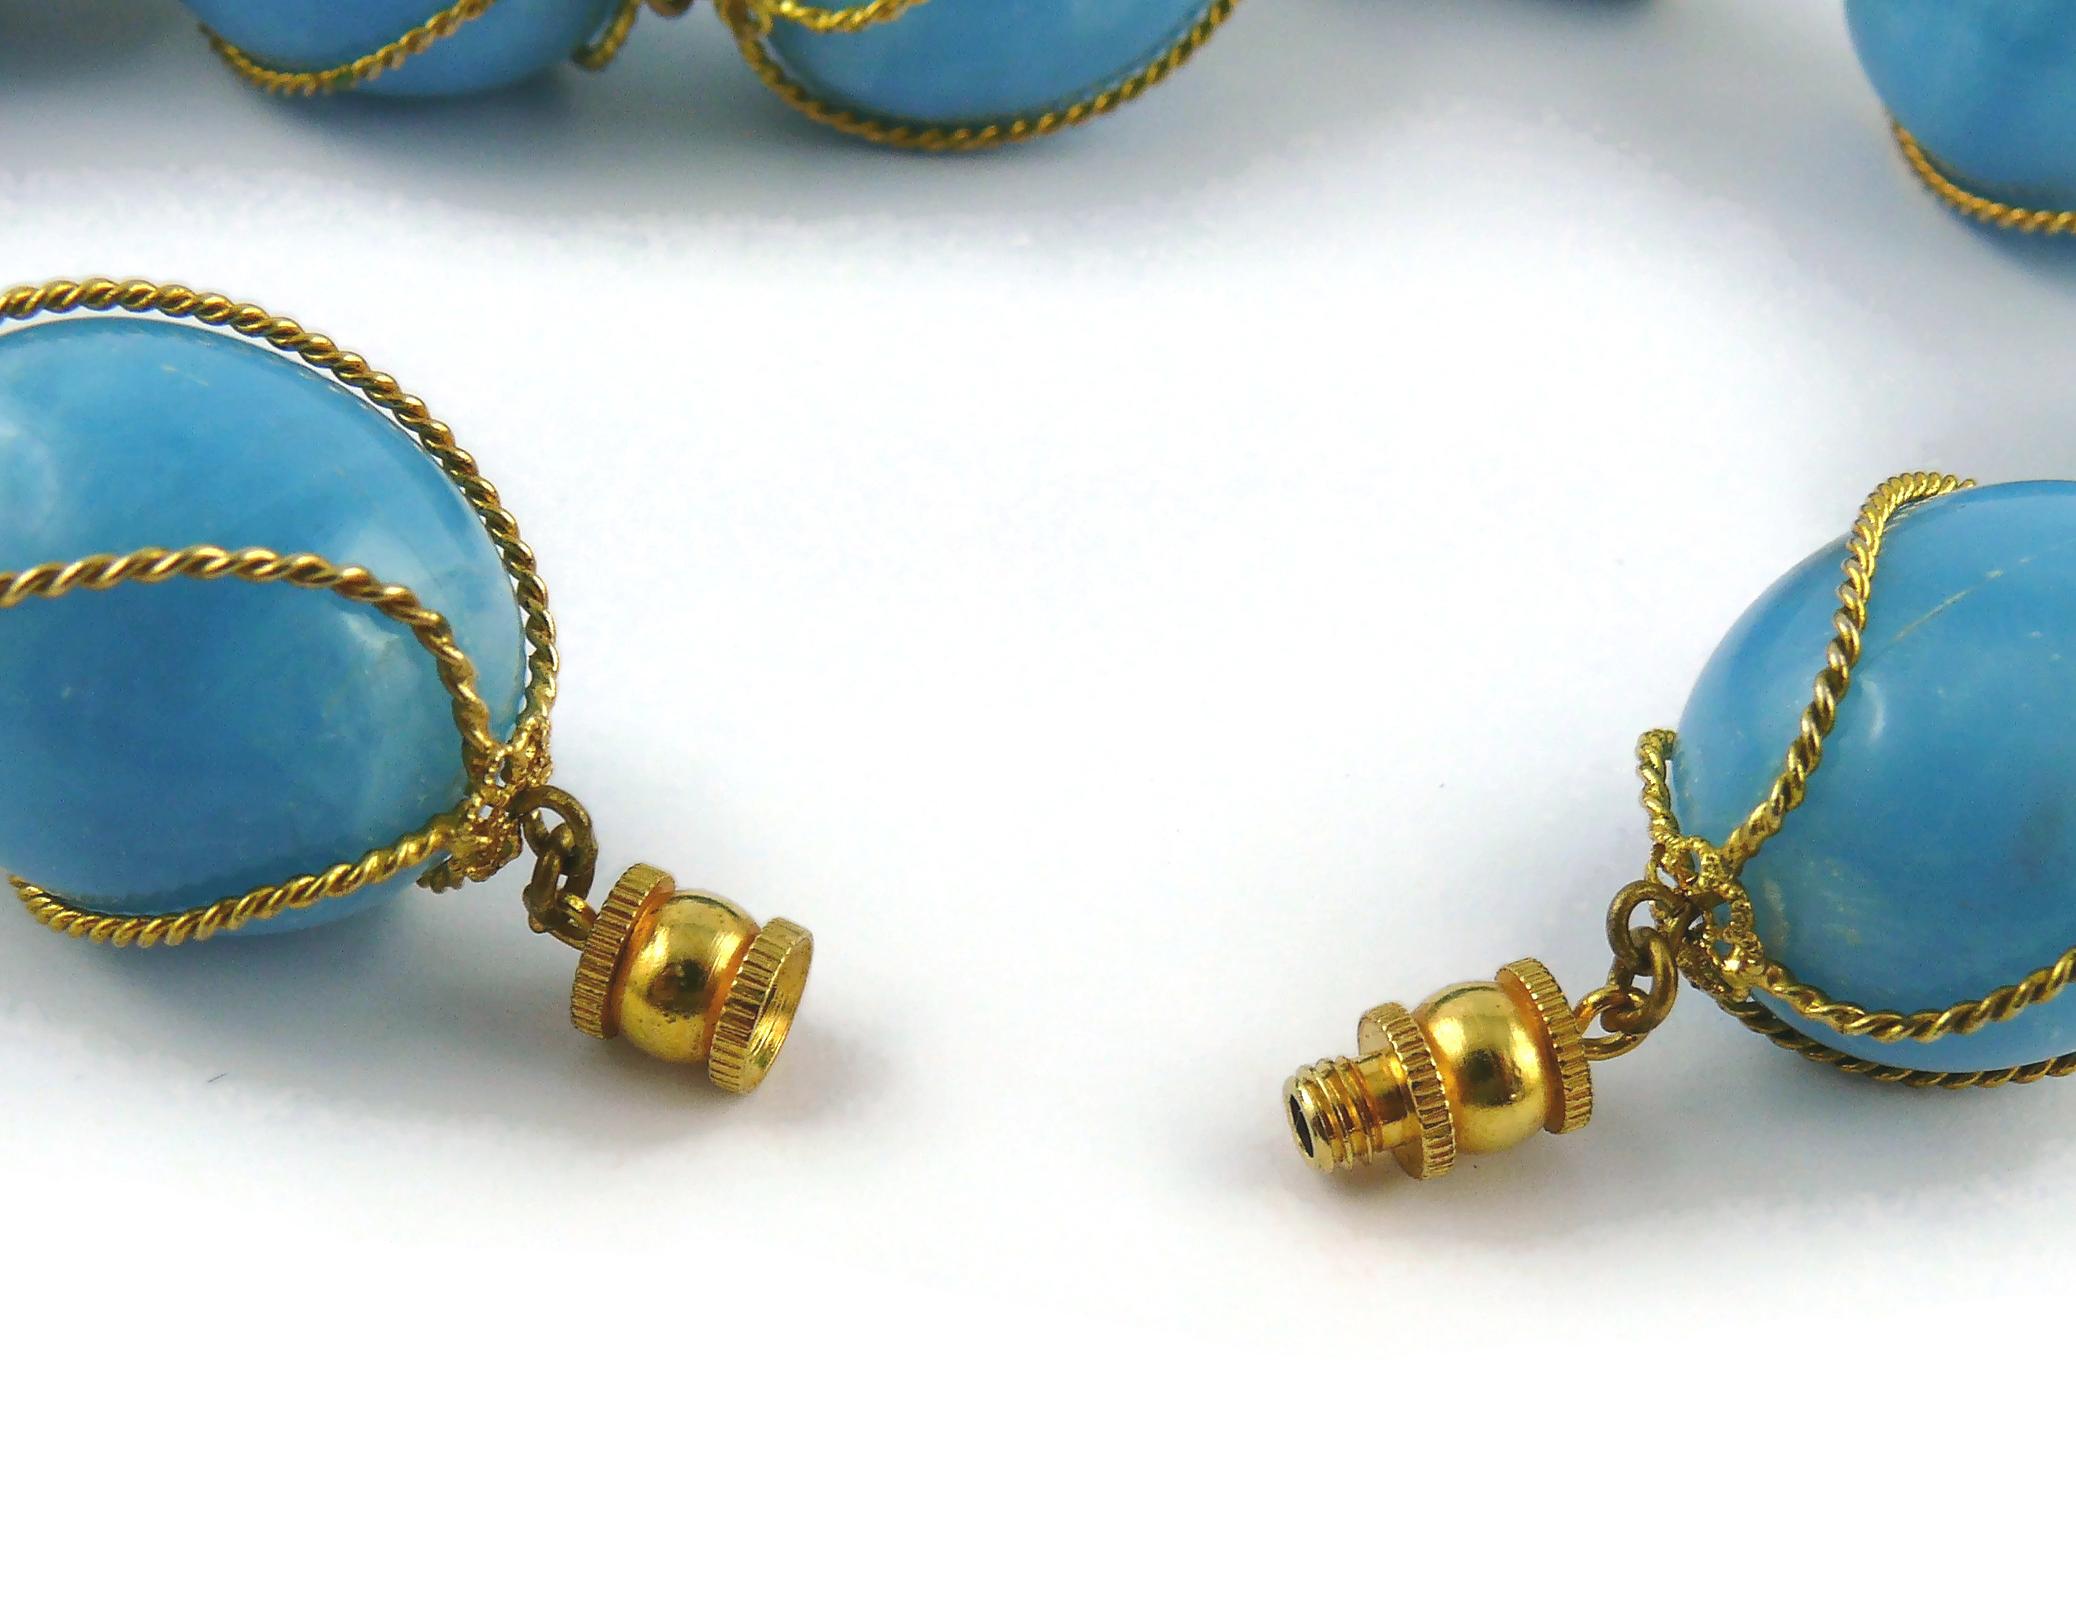 Christian Dior Vintage Encaged Blue Resin Beads Necklace and Earrings Set 1966 For Sale 3